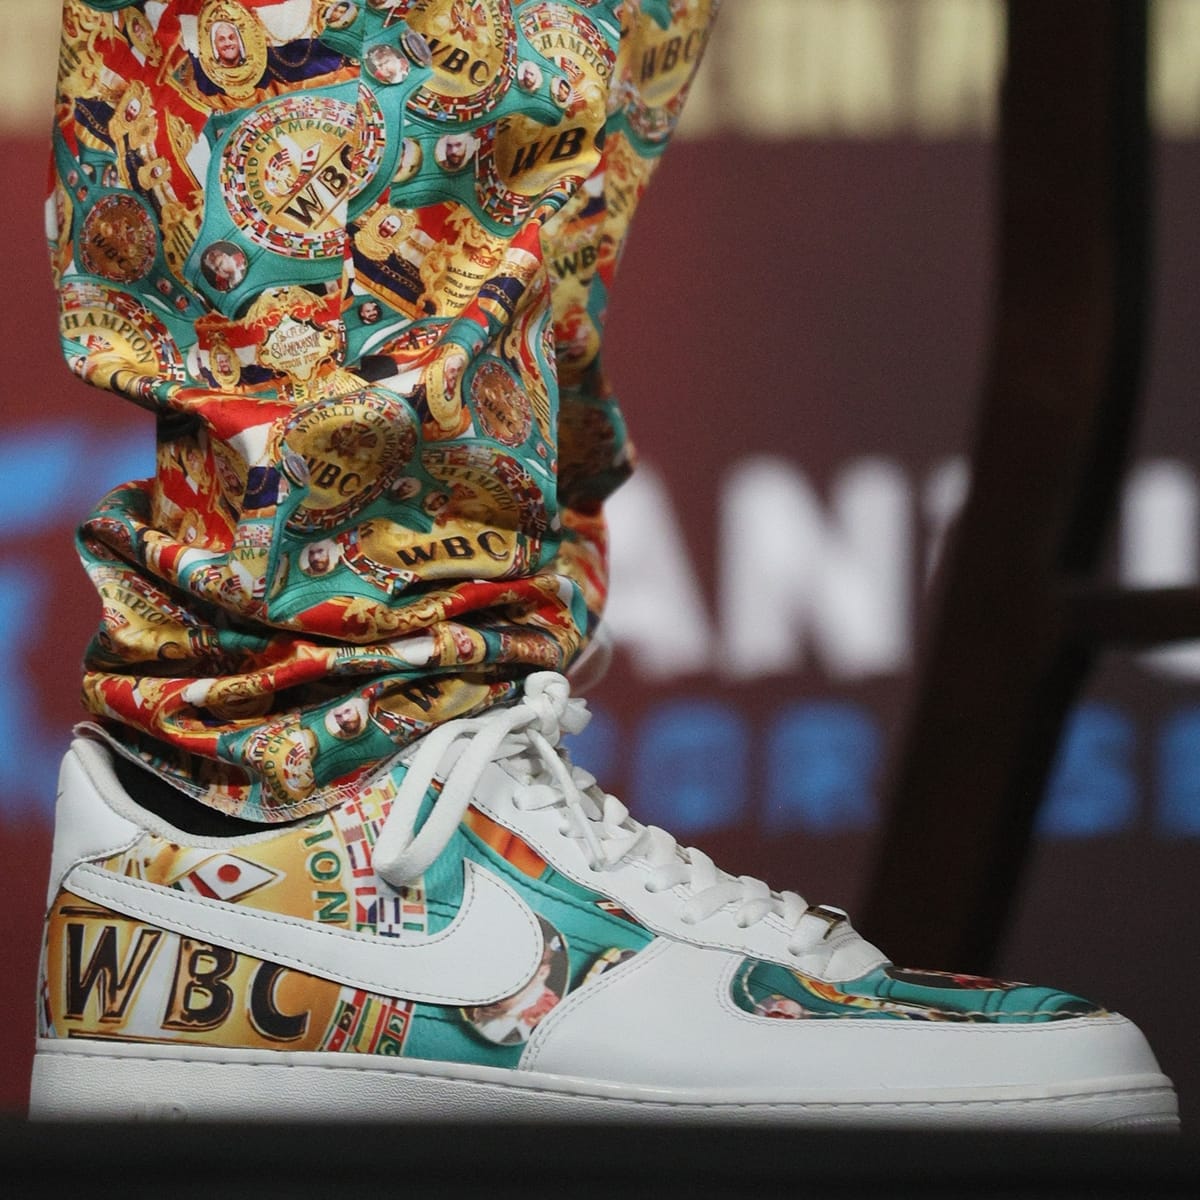 Tyson Fury shows off his size 14 (US) custom Nike Air Force WBC champion shoes